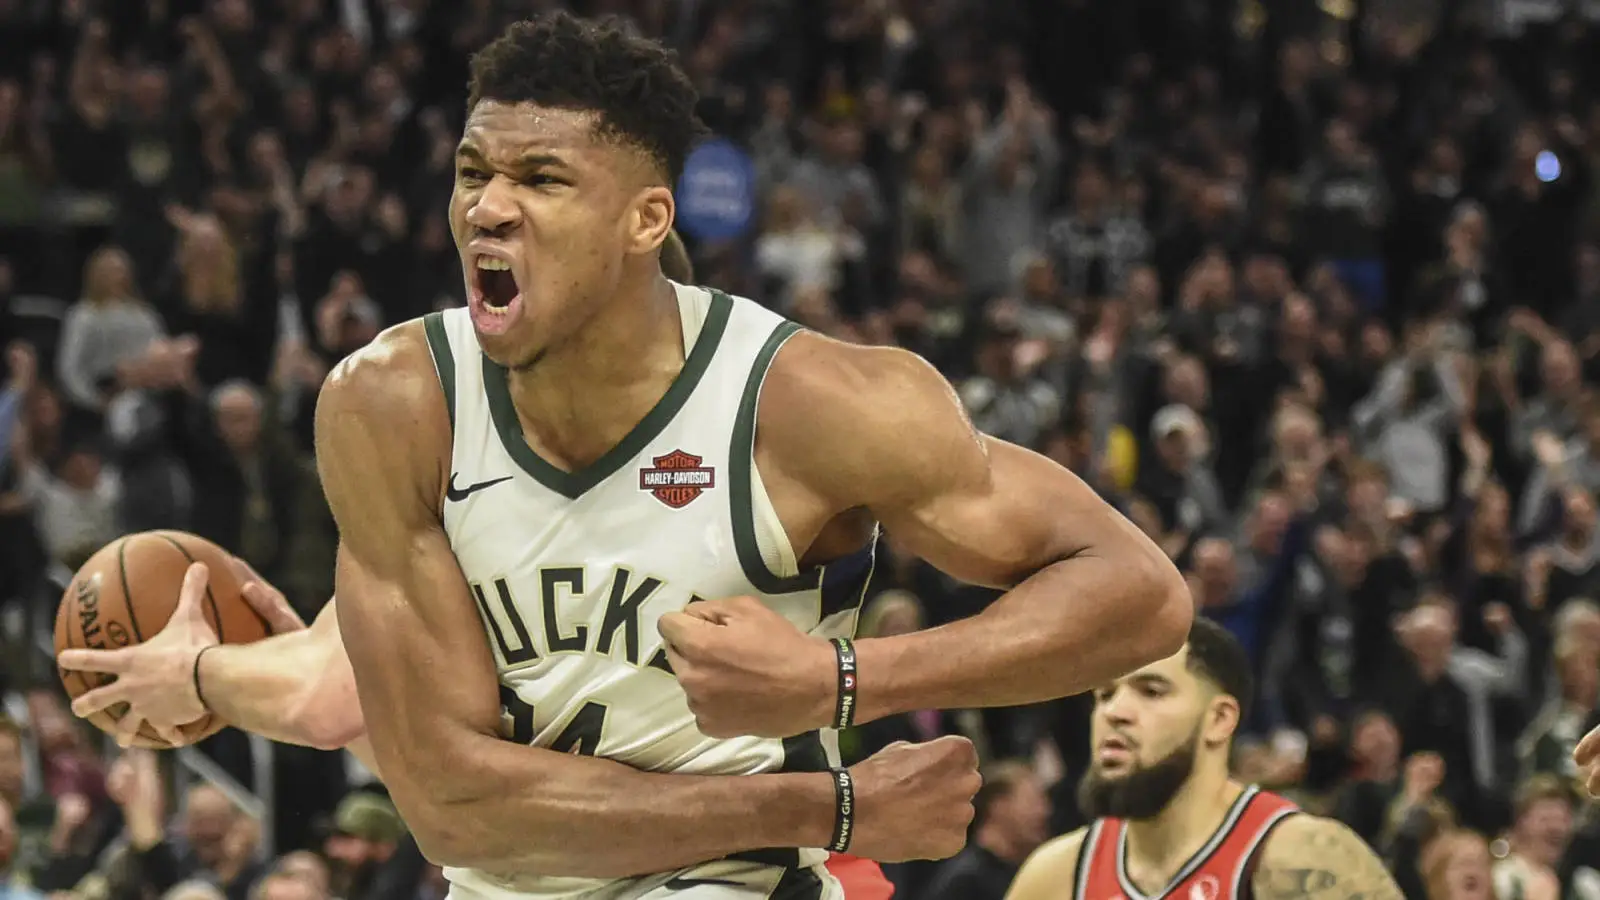 Bucks star Giannis Antetokounmpo has joined the elite LeBron James and Michael Jordan to become one of the 3 persons to lead in franchise points and rebounds with his latest Bucks milestone.